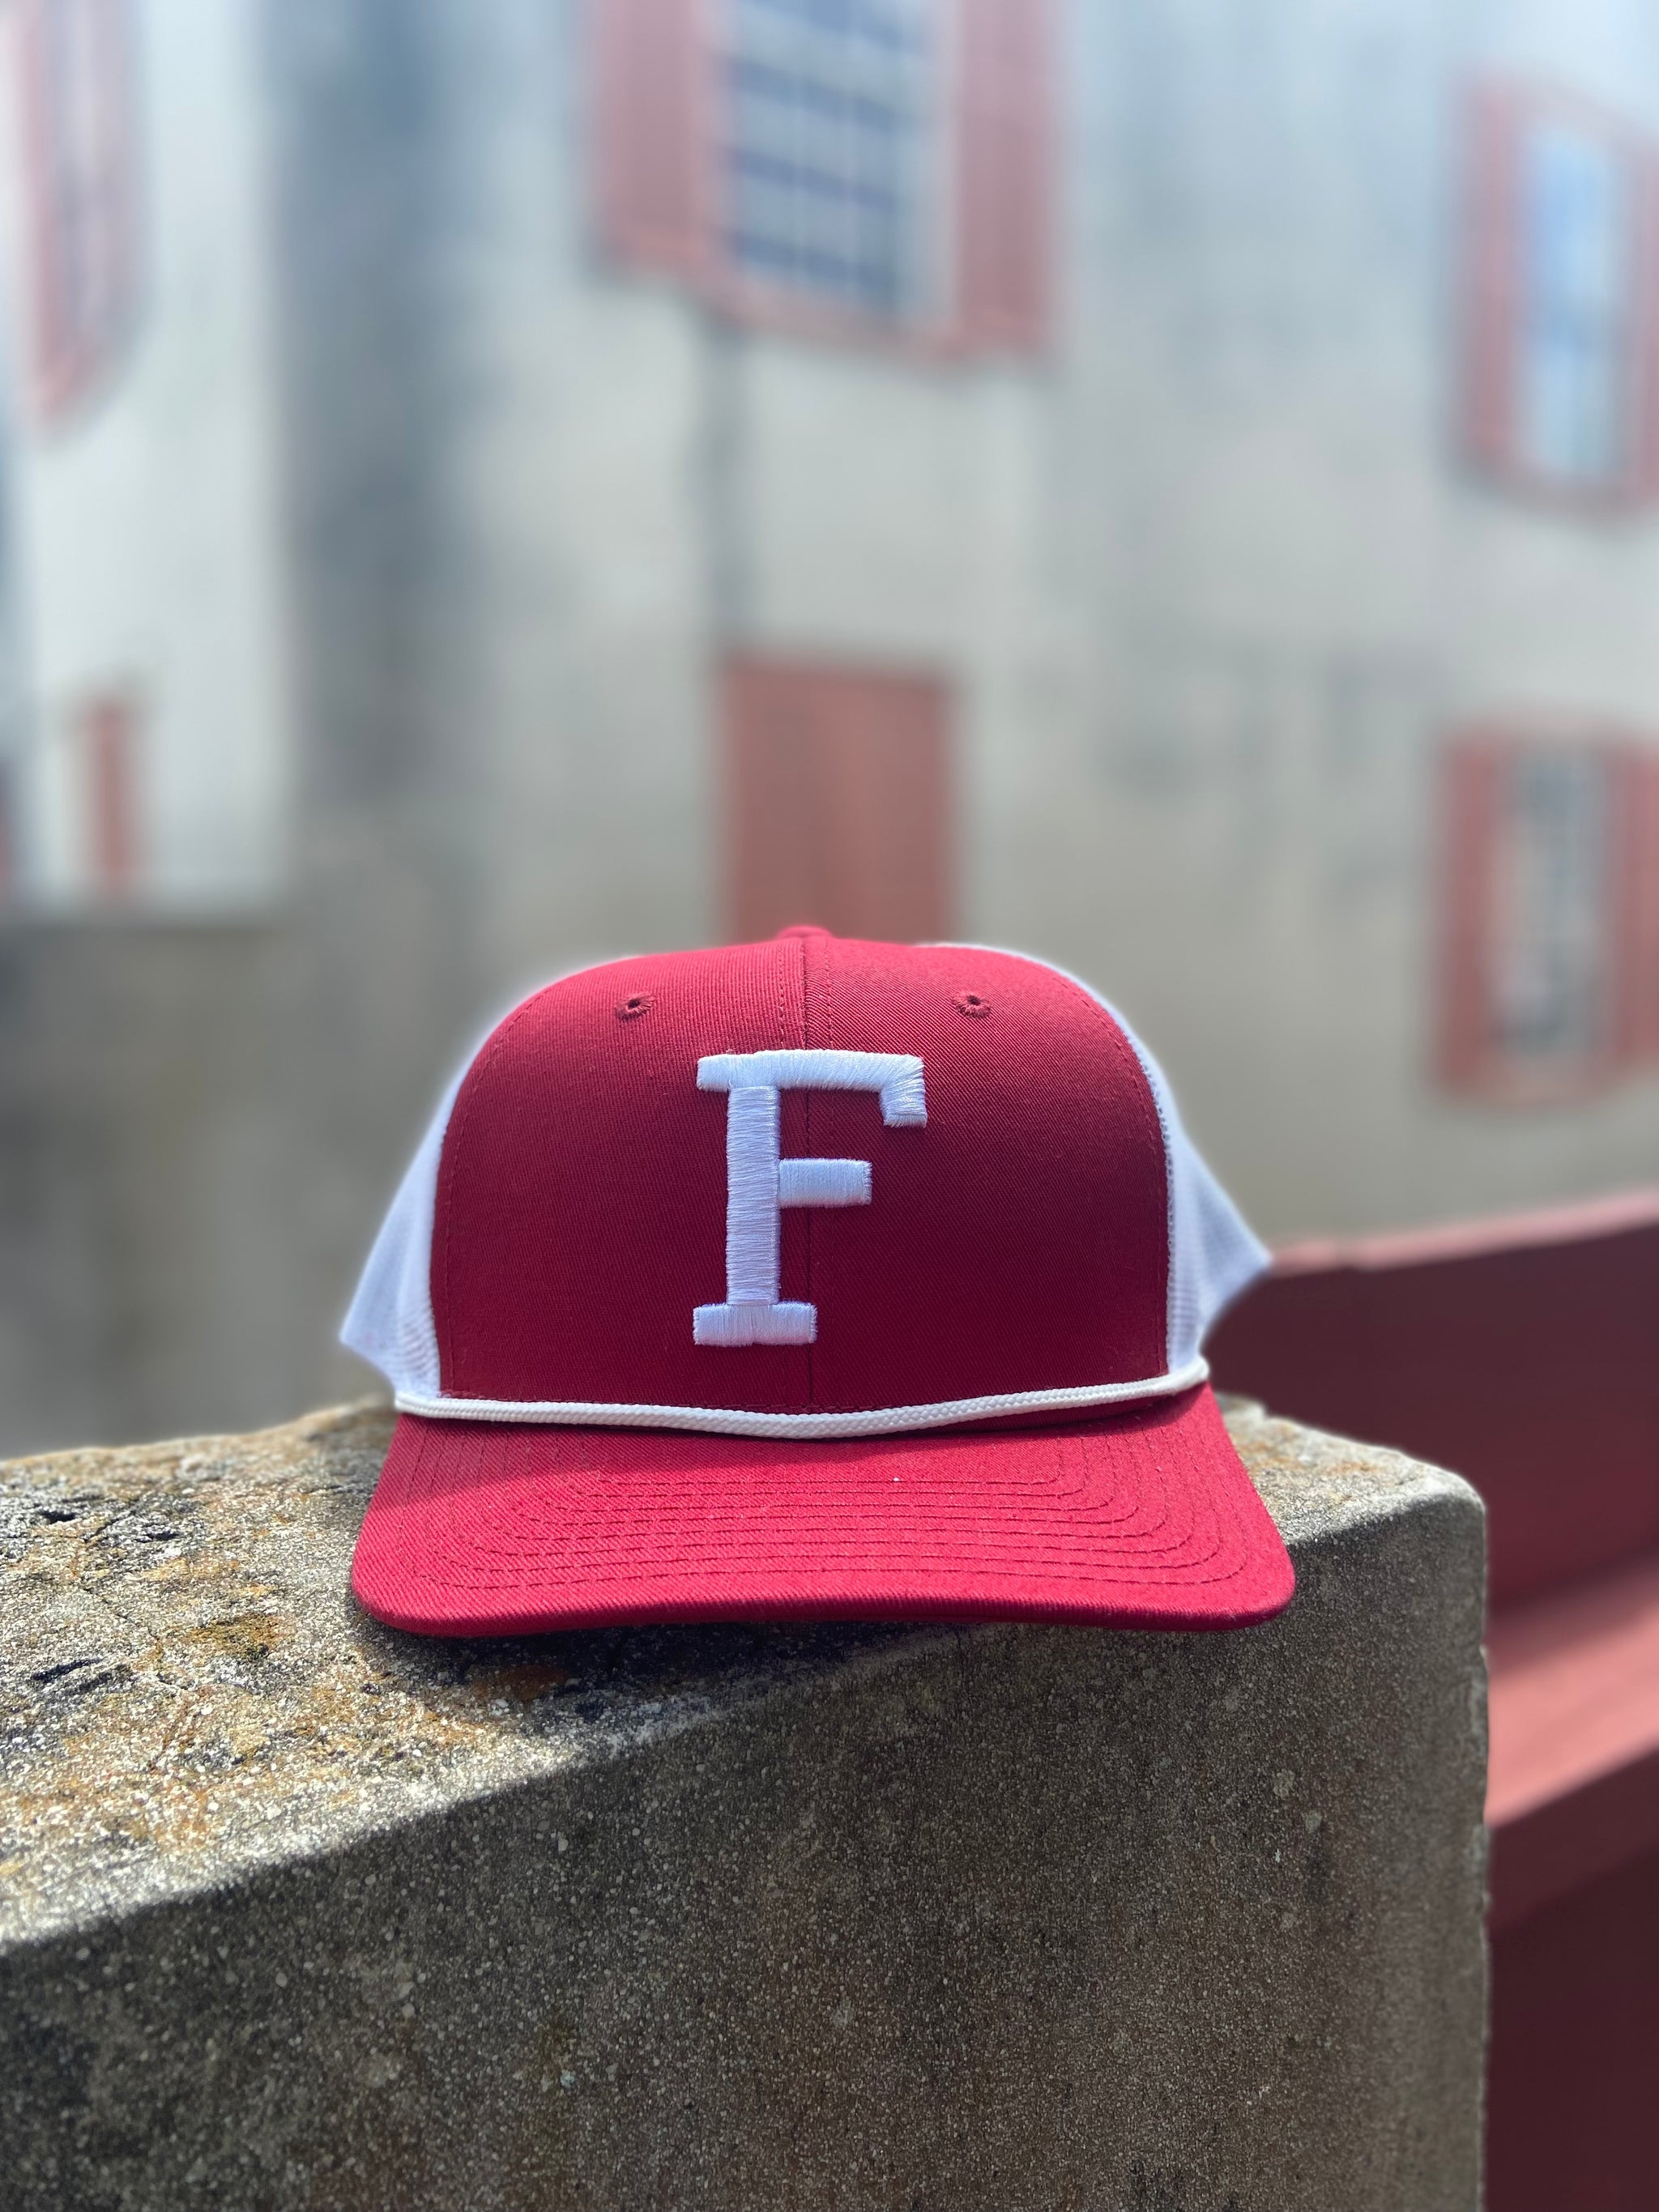 Crimson hat with white mesh back. White F in center over white rope